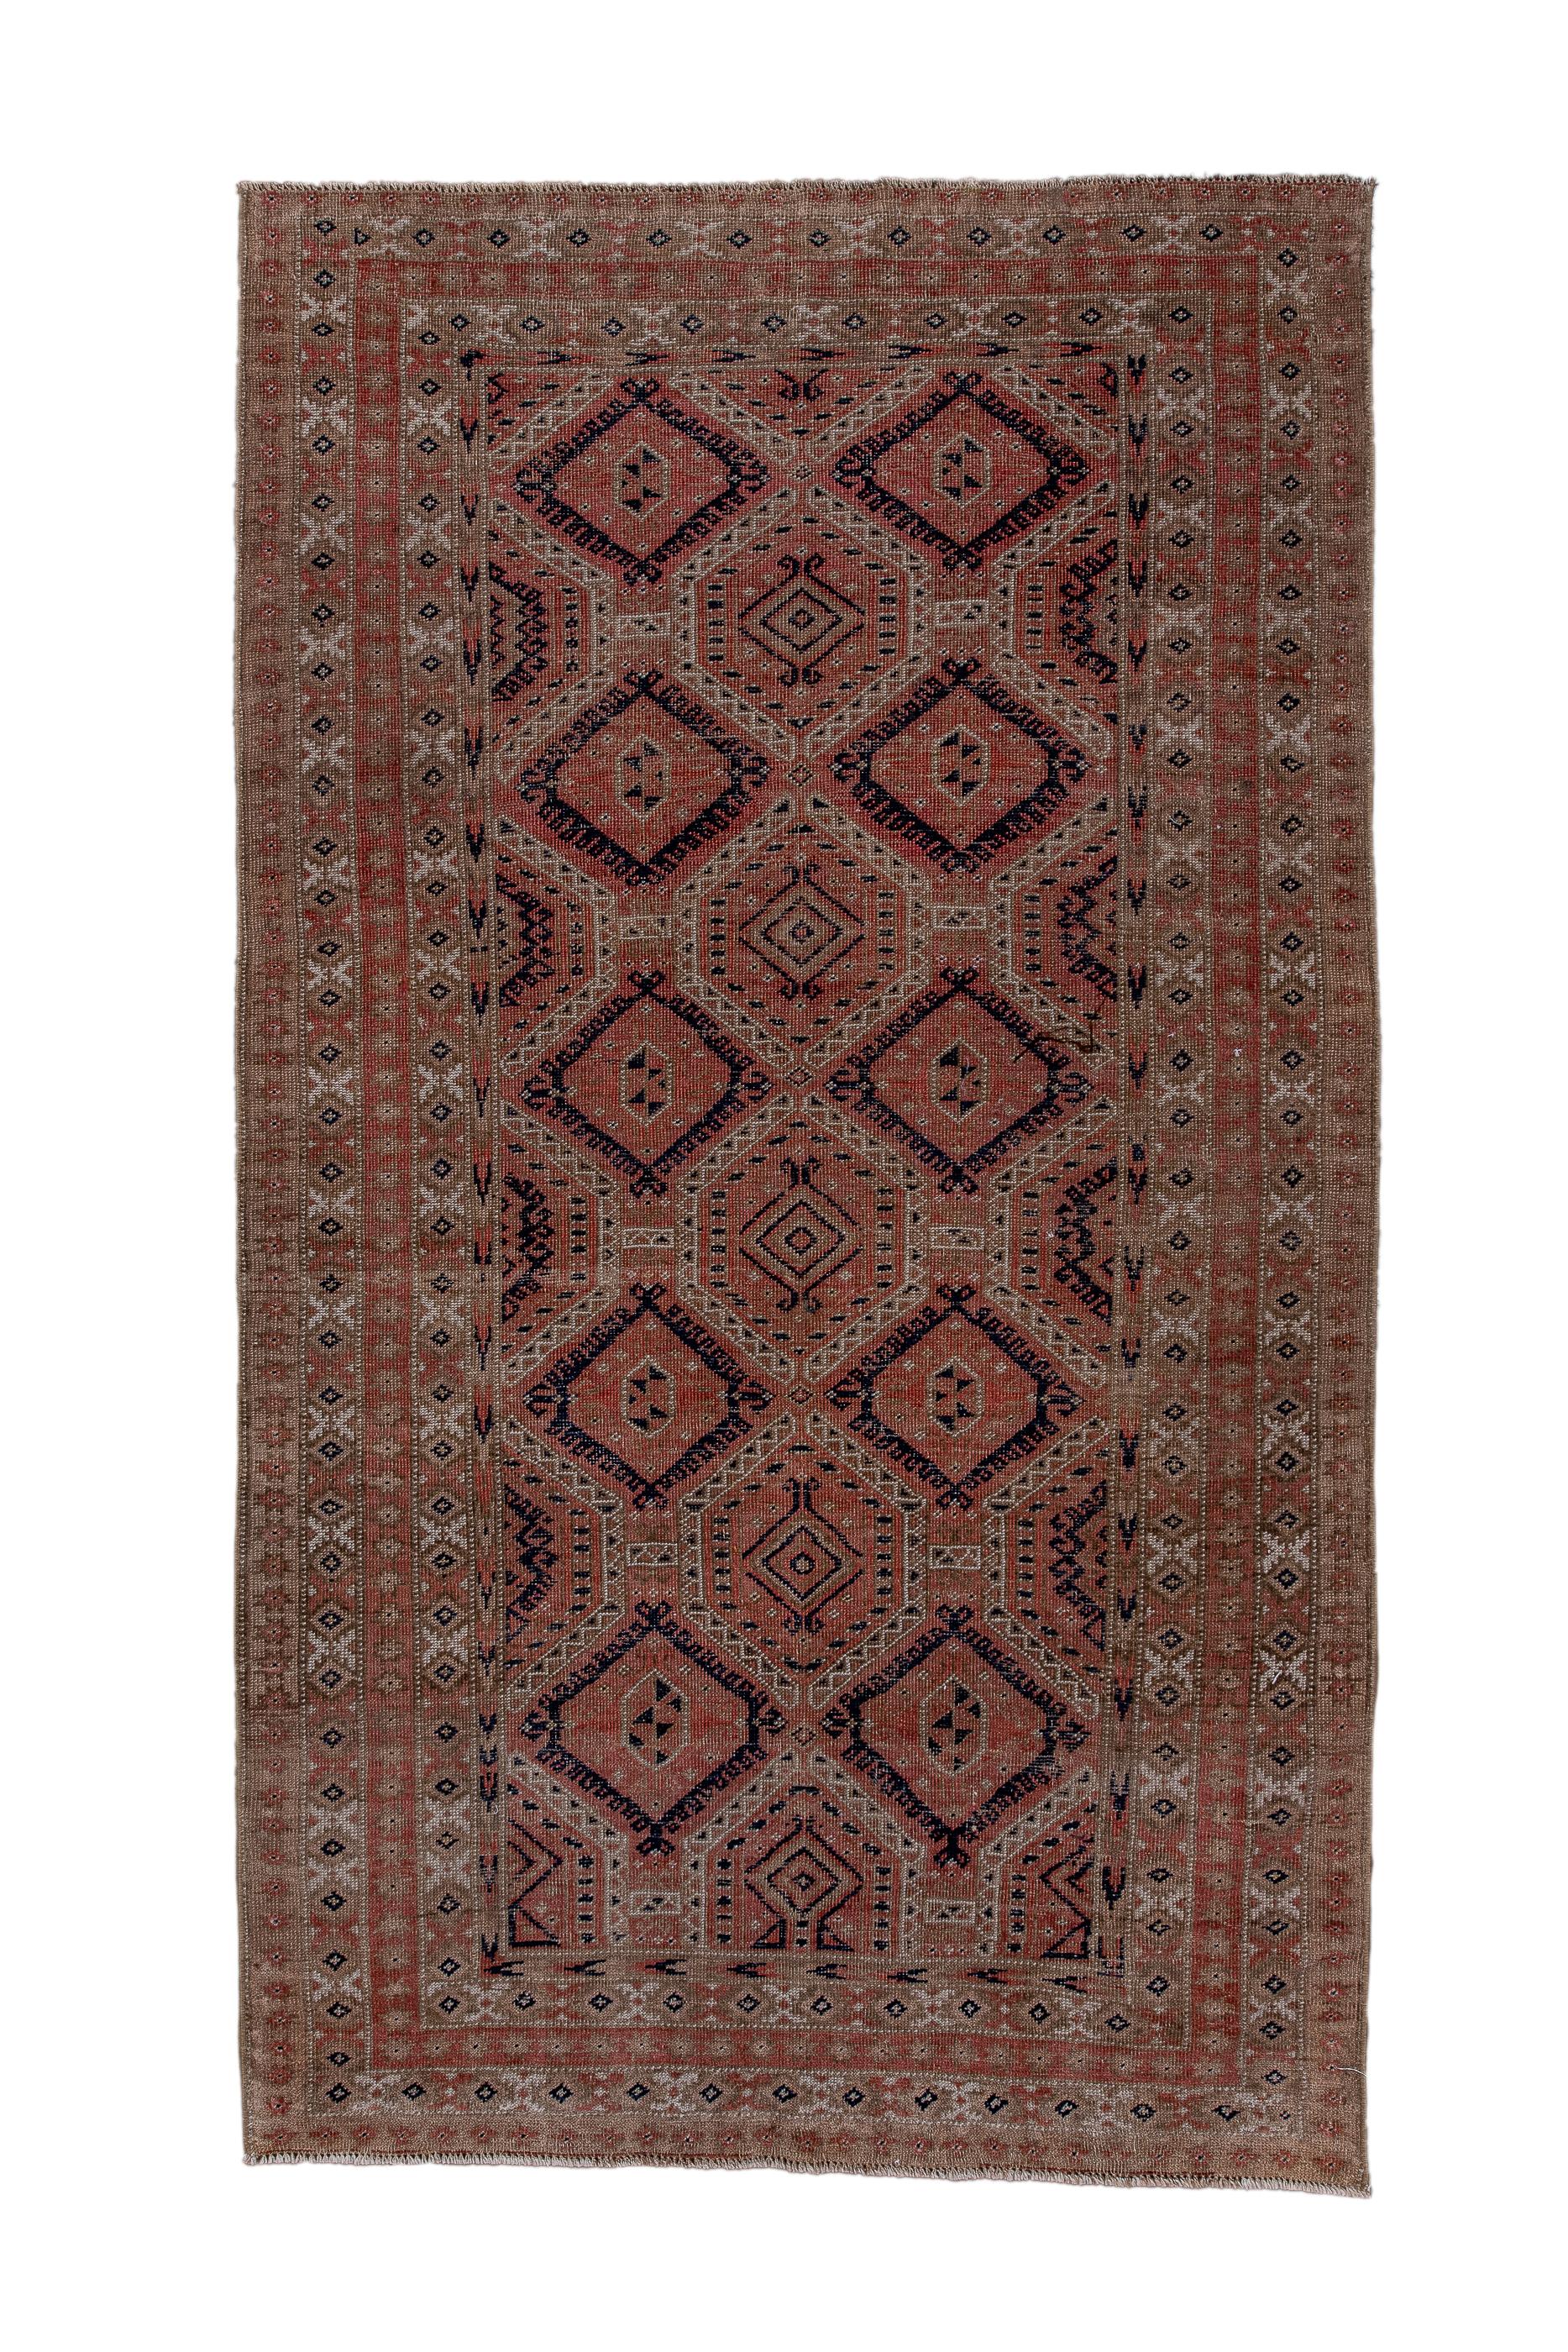 This nomadic rug shows an allover pattern of large, stepped hexagons alternating rows with stepped dark blue diamonds, all on a coral field. Pattern is not balanced vertically.  Two major borders with X and lozenge repeat patterns. Moderate/medium